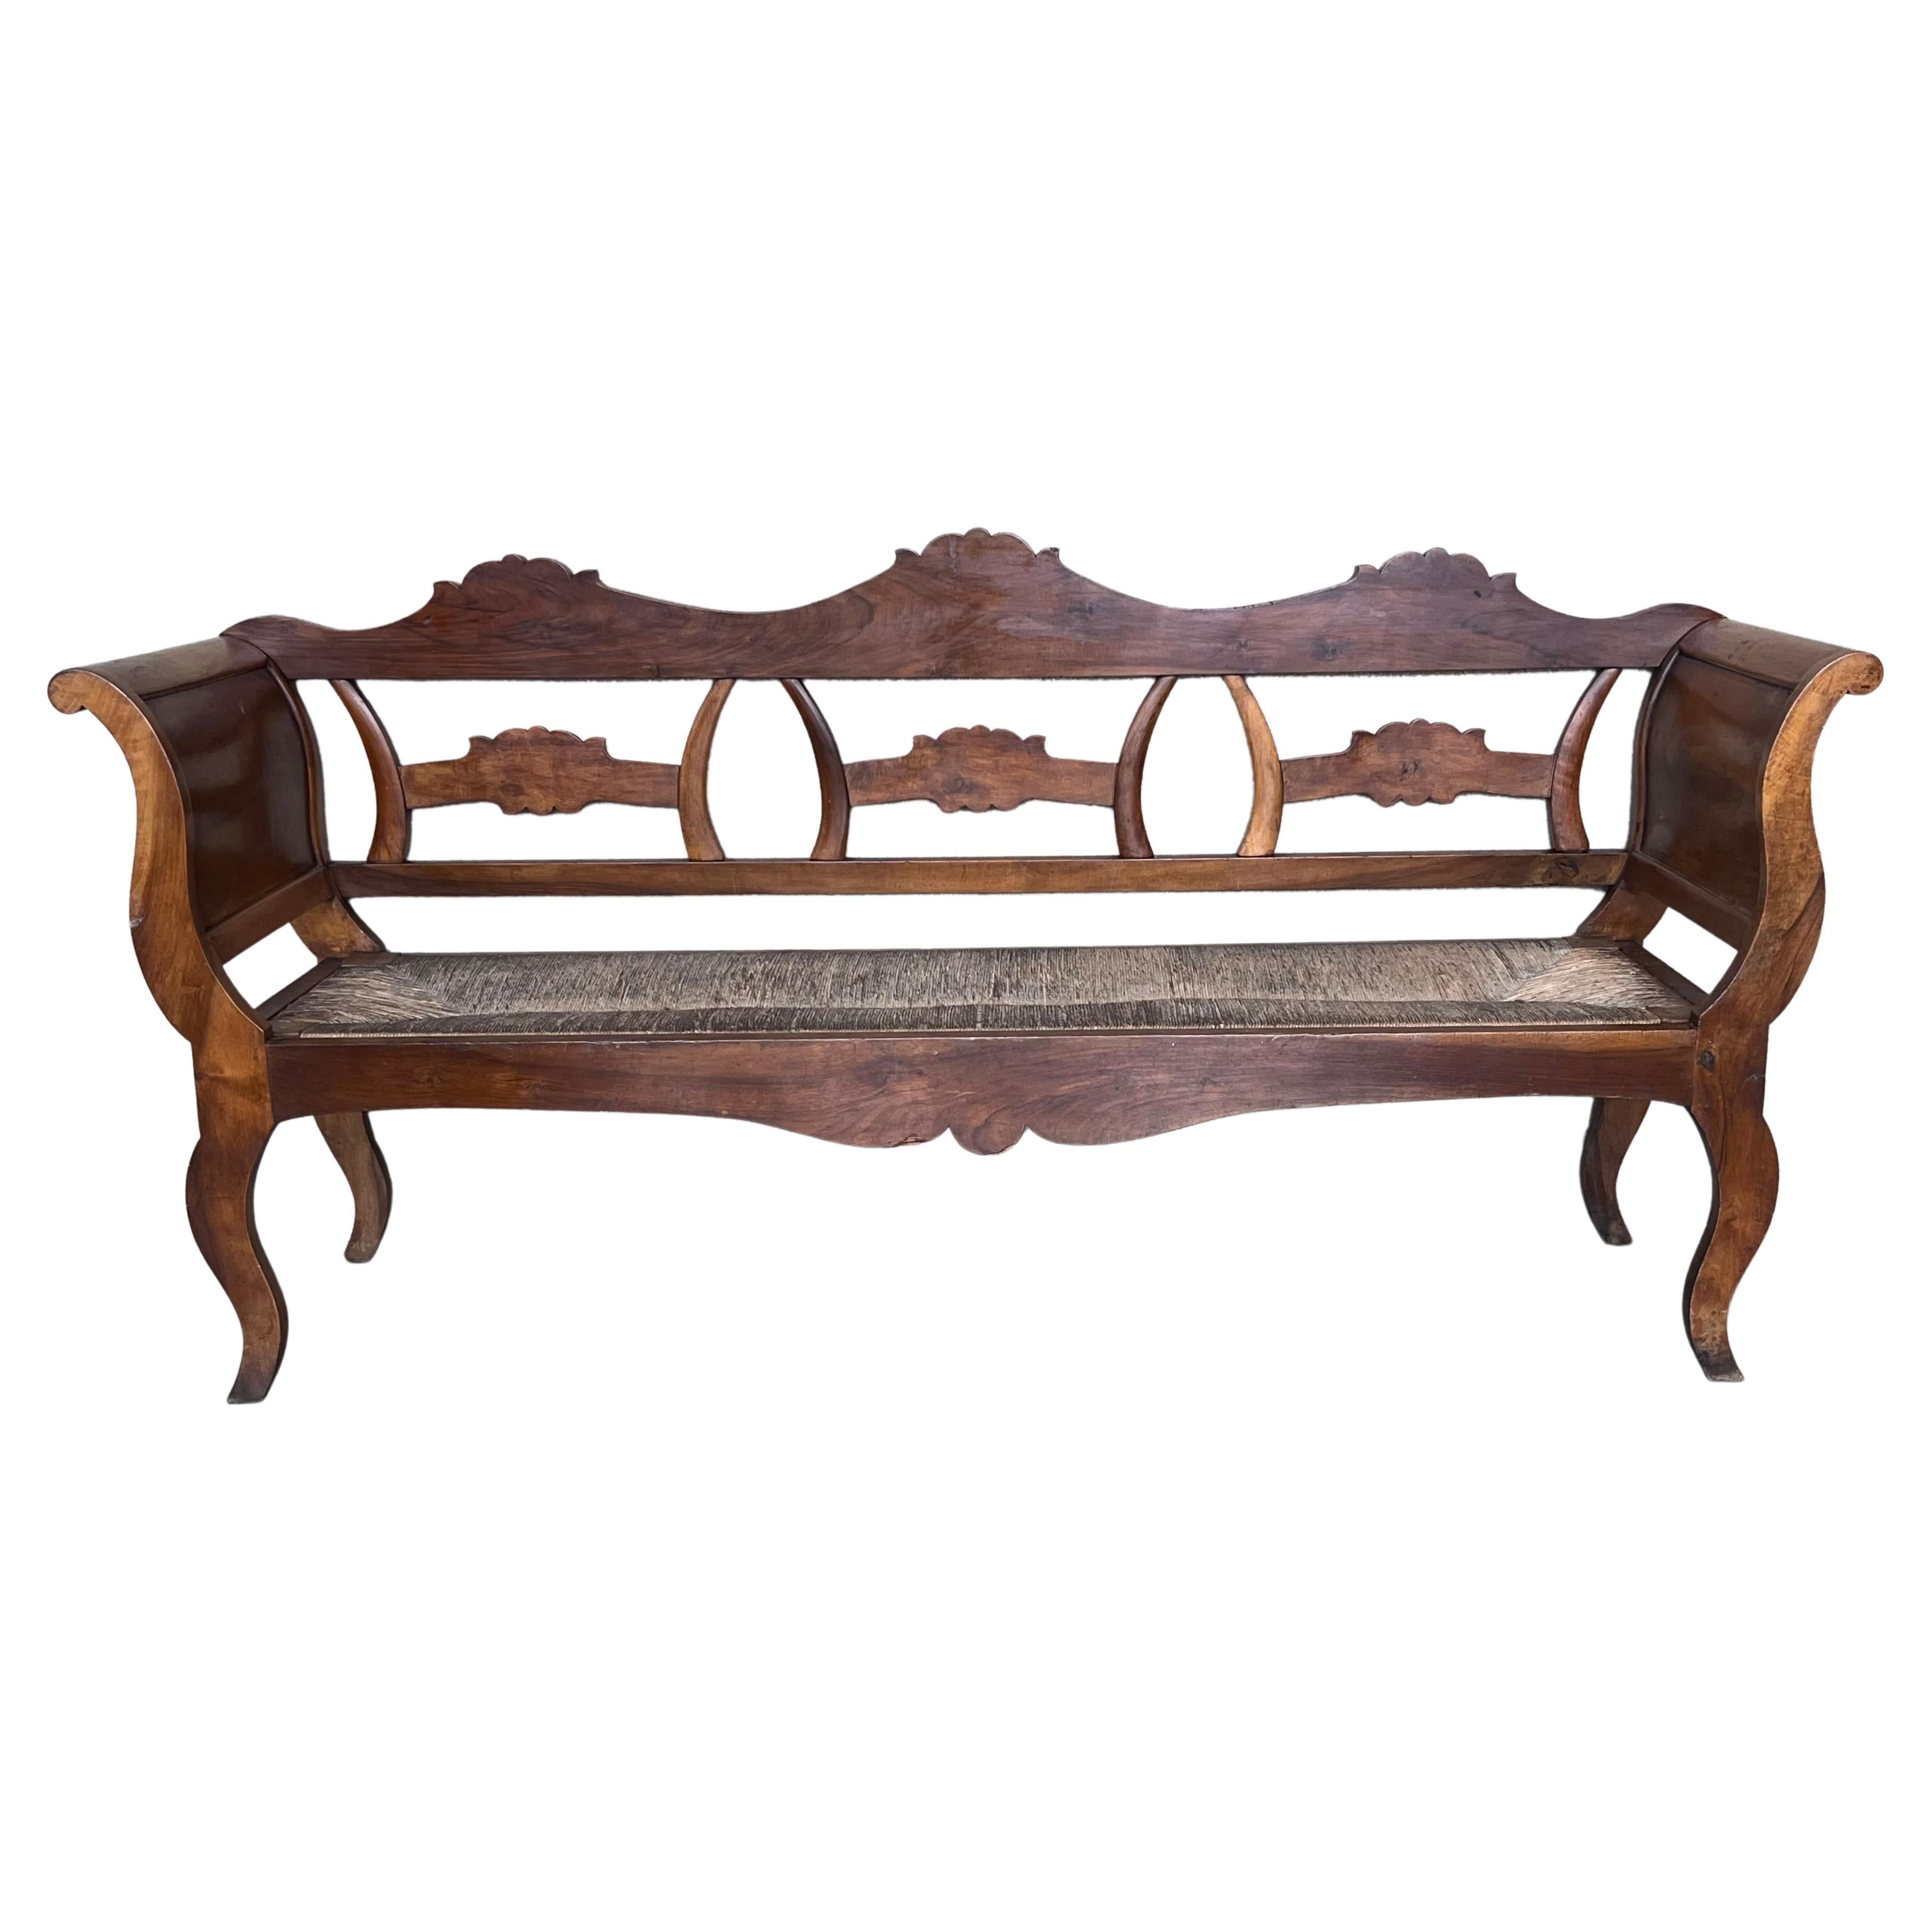 20th Century Catalan Bench in Walnut with Caned Seat For Sale